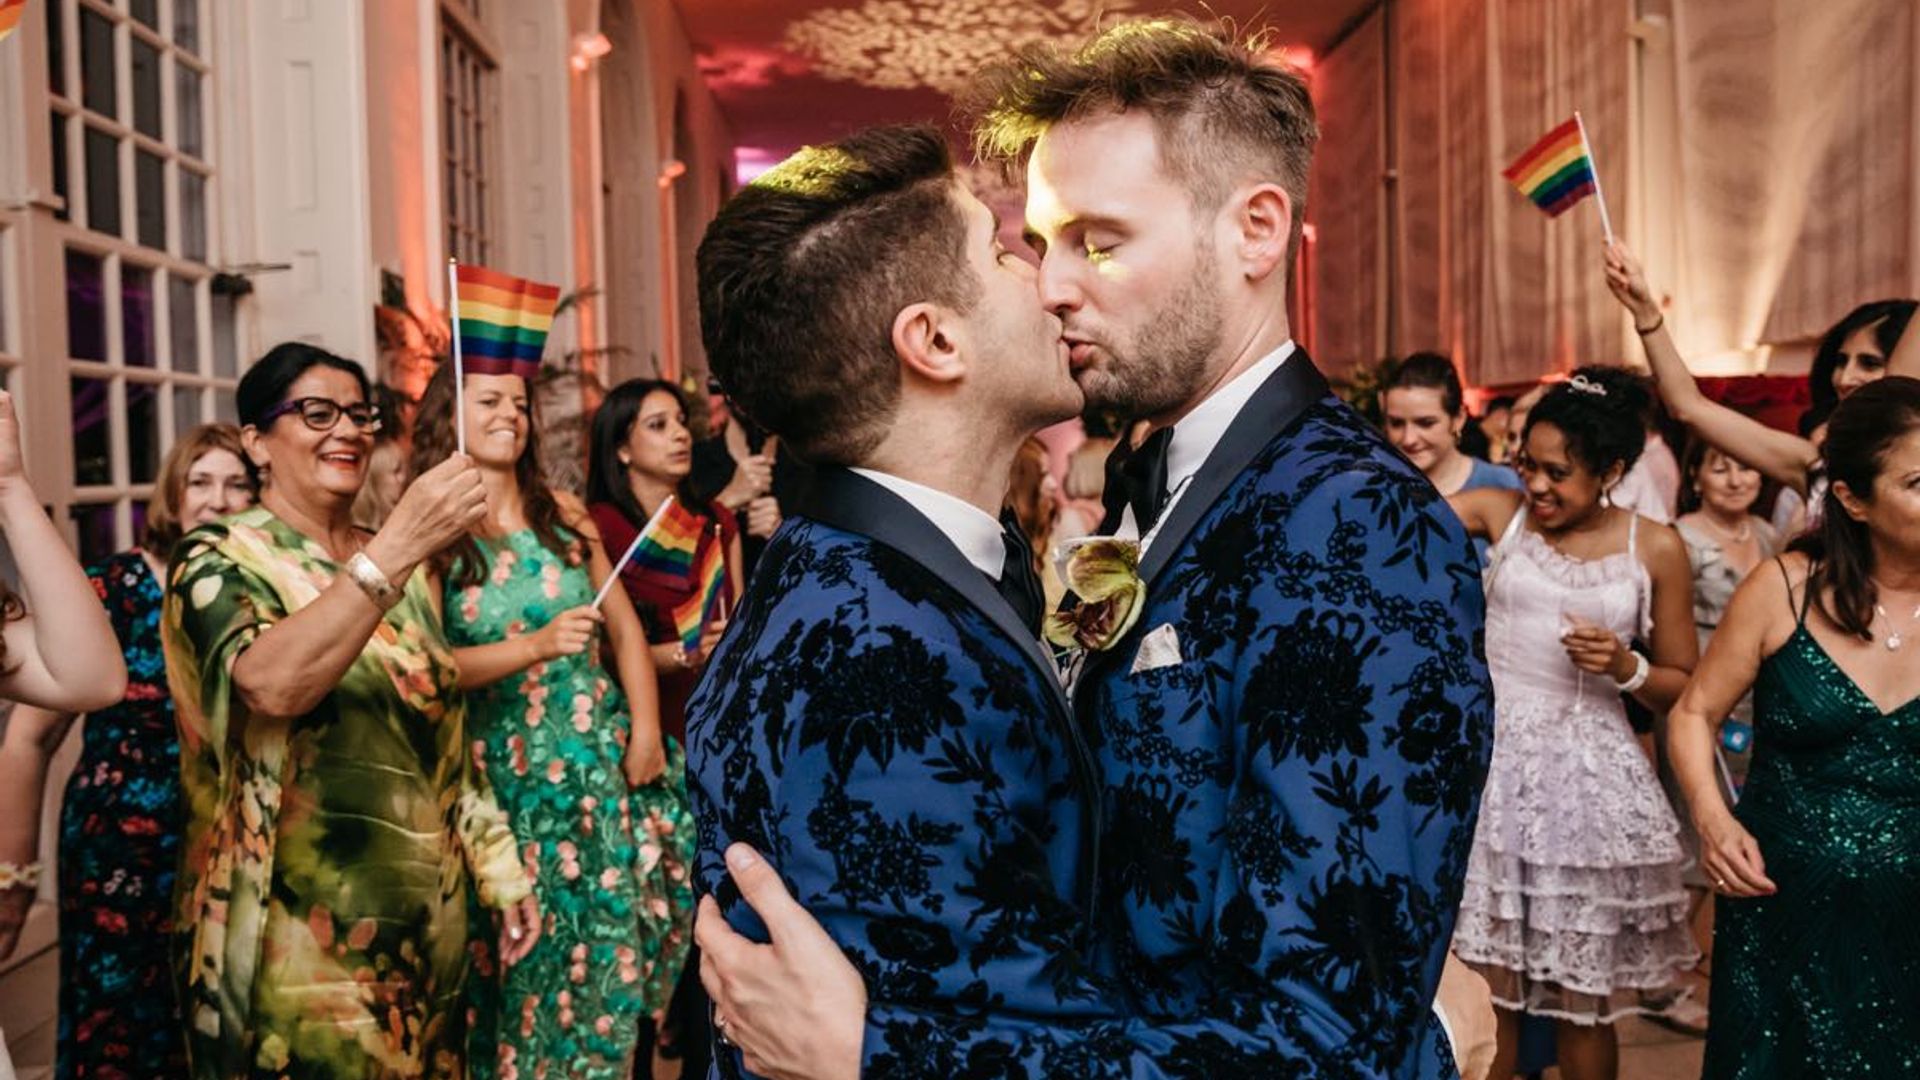 Inside the wedding of LGBTQ power couple Benjamin Cohen and Anthony James